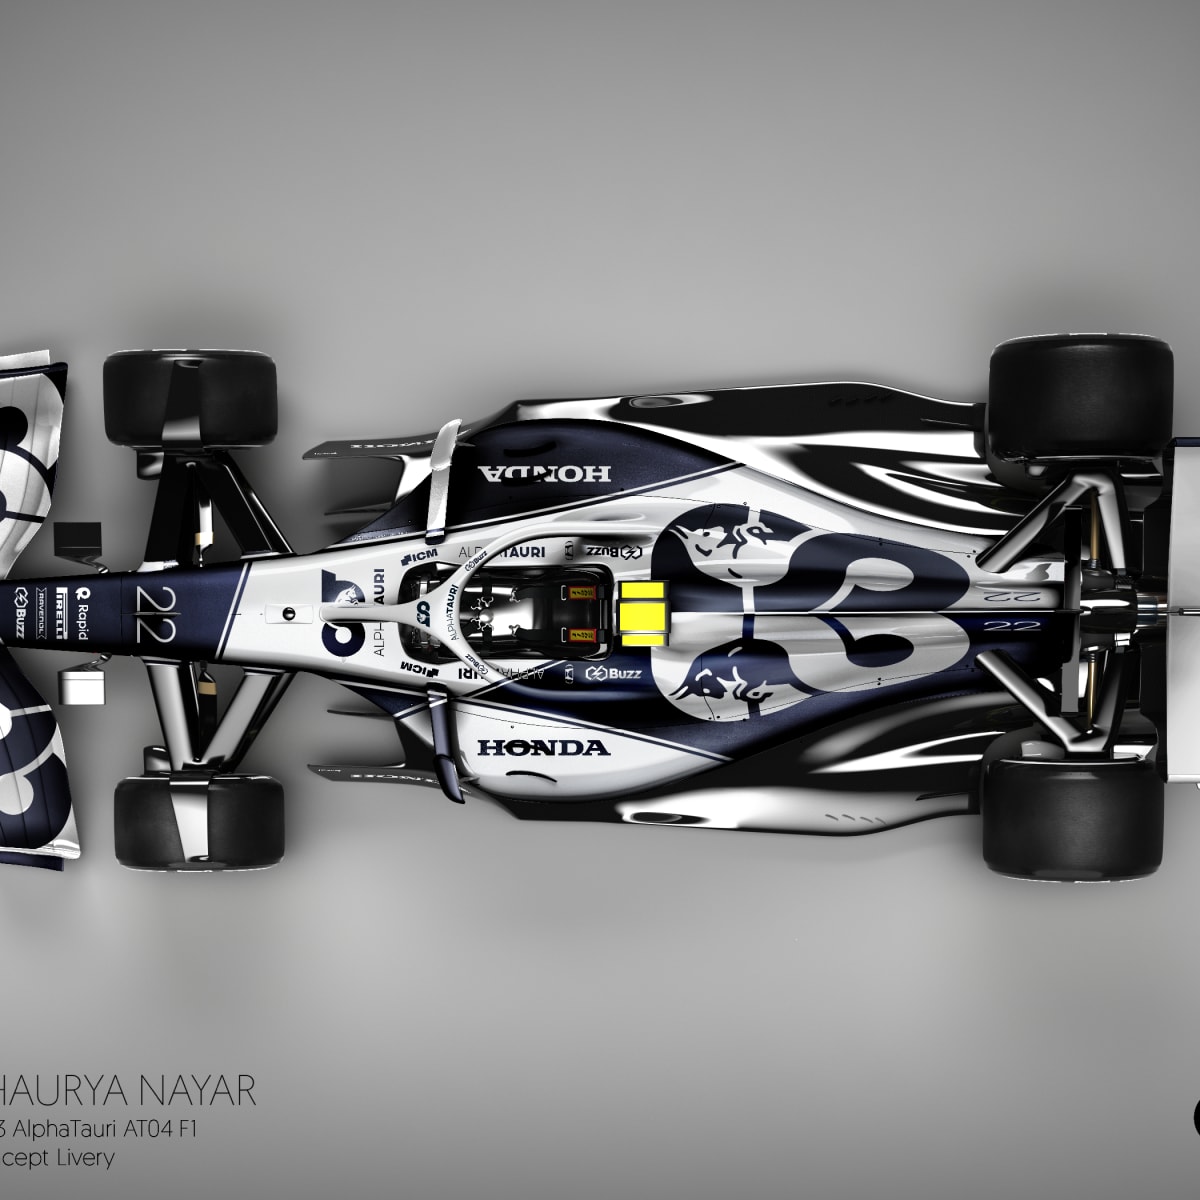 F1 News: AlphaTauri 2023 Concept Livery Designed By Fan It Out Of The Park Briefings. Latest News, Rumours, Videos, and Standings.com